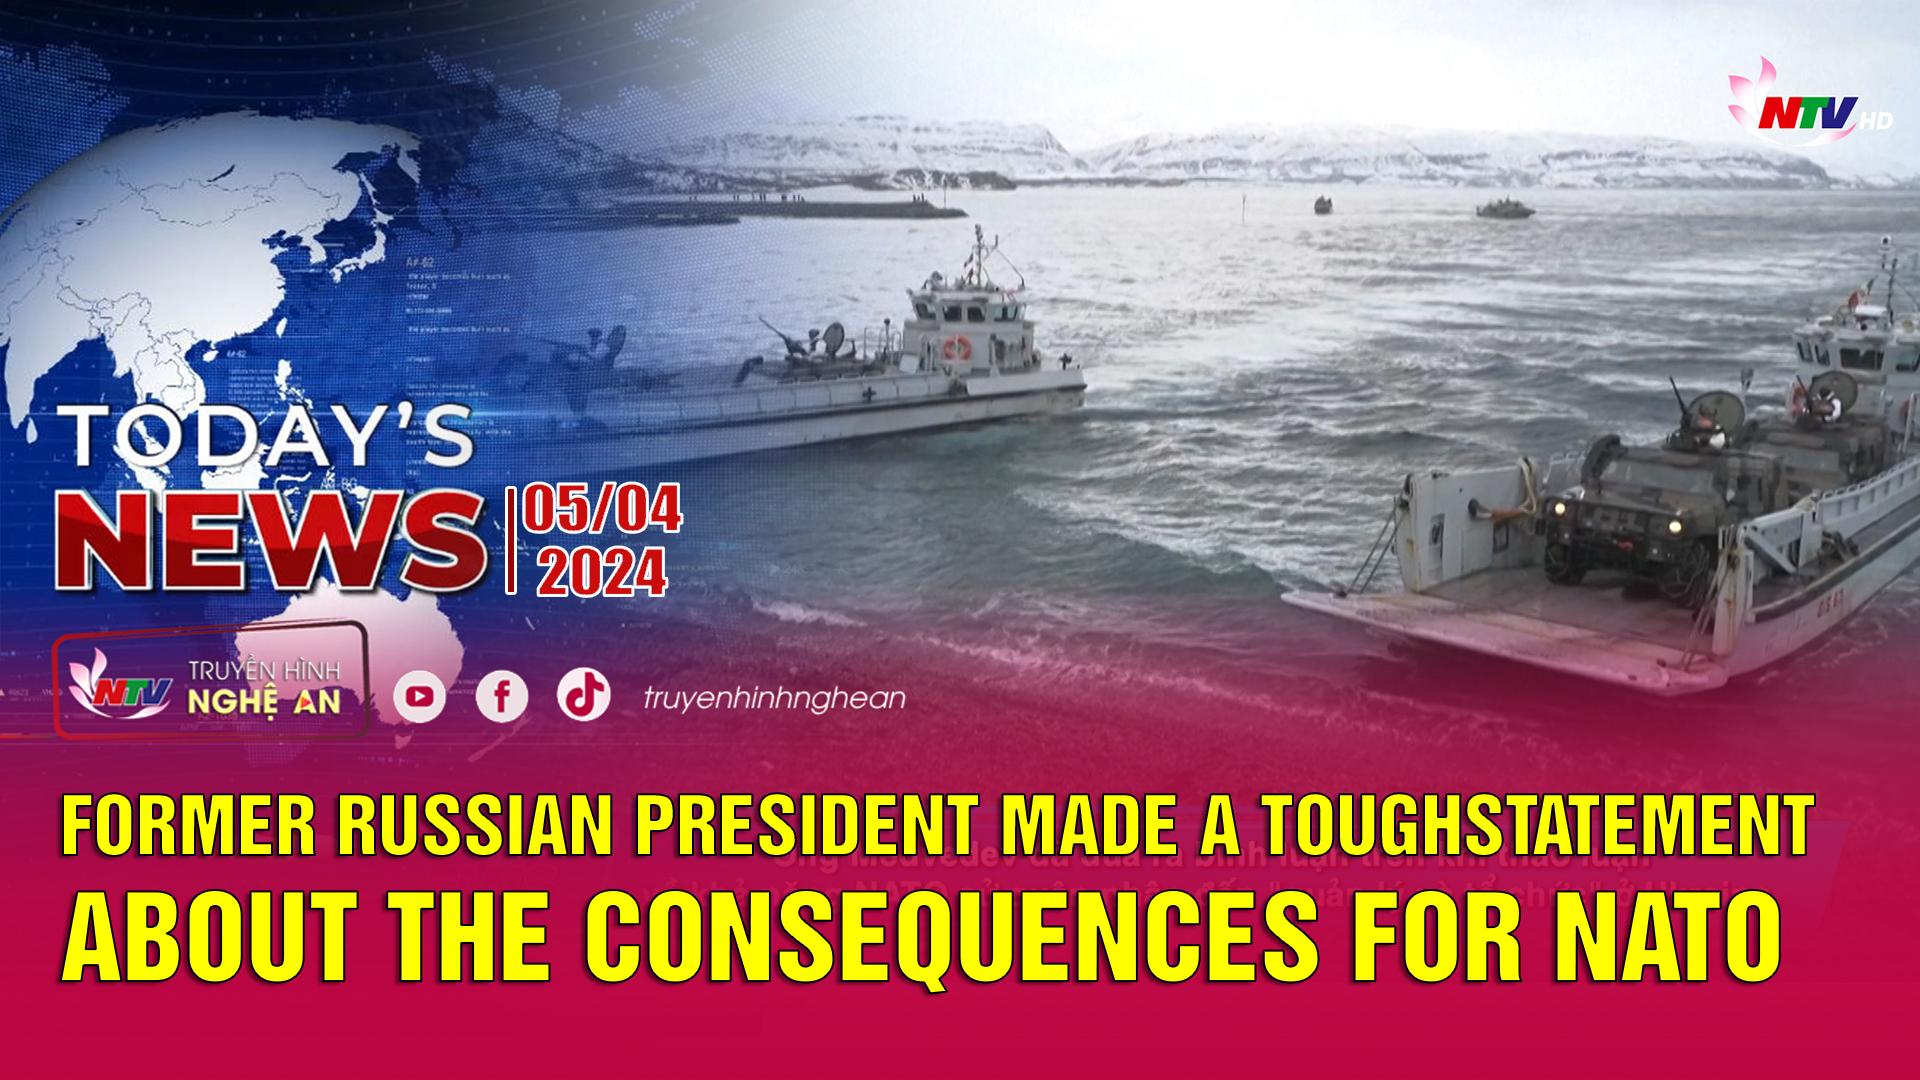 Today's News - 05/04/2024:  Former Russian President made a toughstatement about the consequences for NATO soldiers in Ukraine